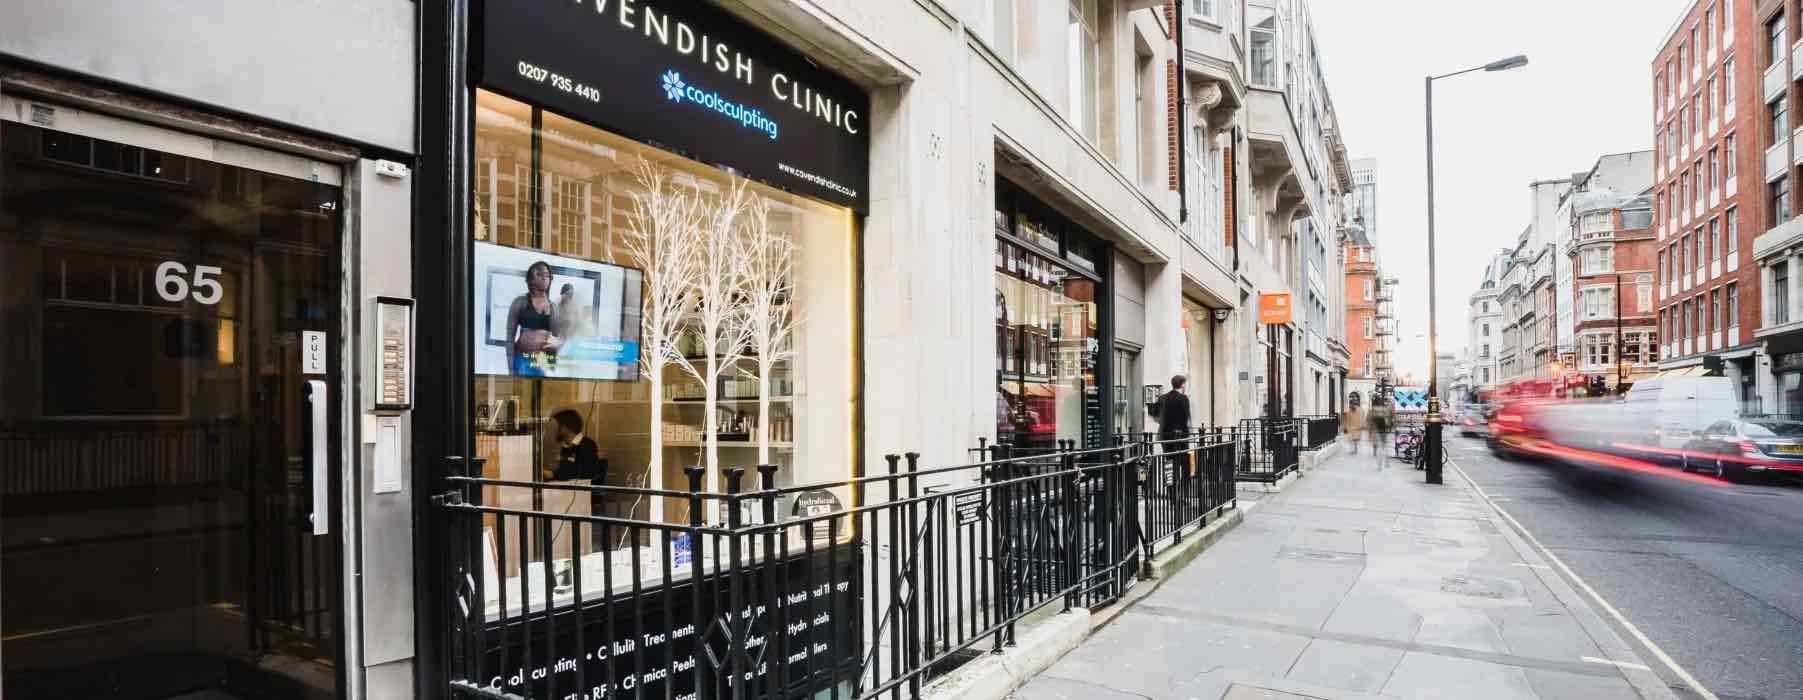 The History of Cavendish Clinic